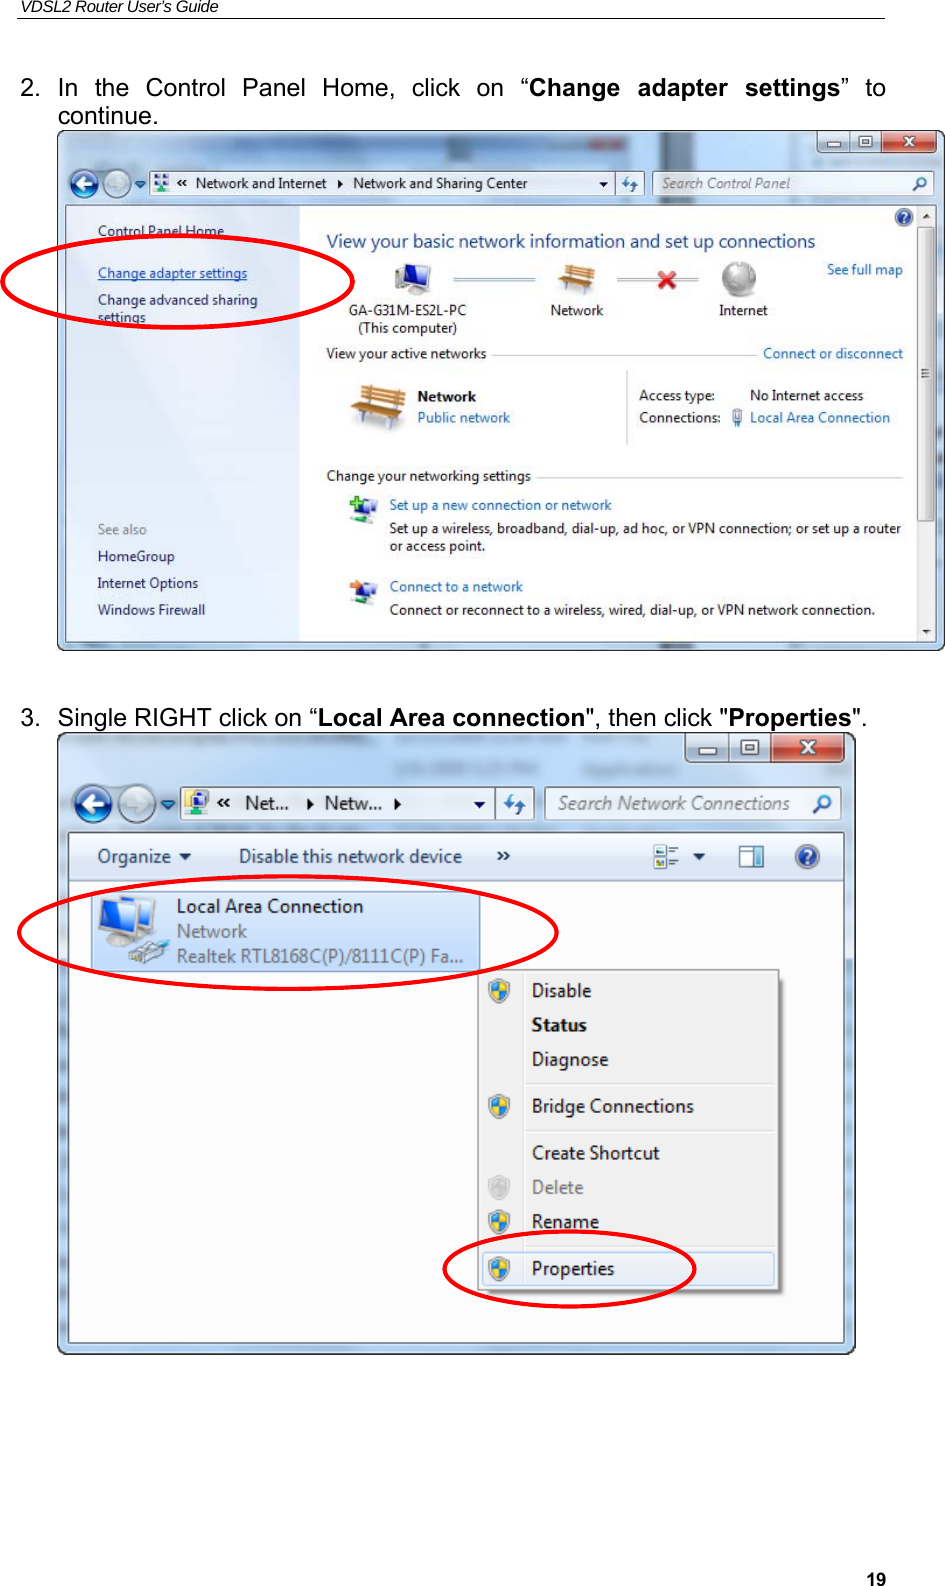 VDSL2 Router User’s Guide     192.  In  the  Control  Panel  Home,  click  on  “Change  adapter  settings”  to continue.   3.  Single RIGHT click on “Local Area connection&quot;, then click &quot;Properties&quot;.       